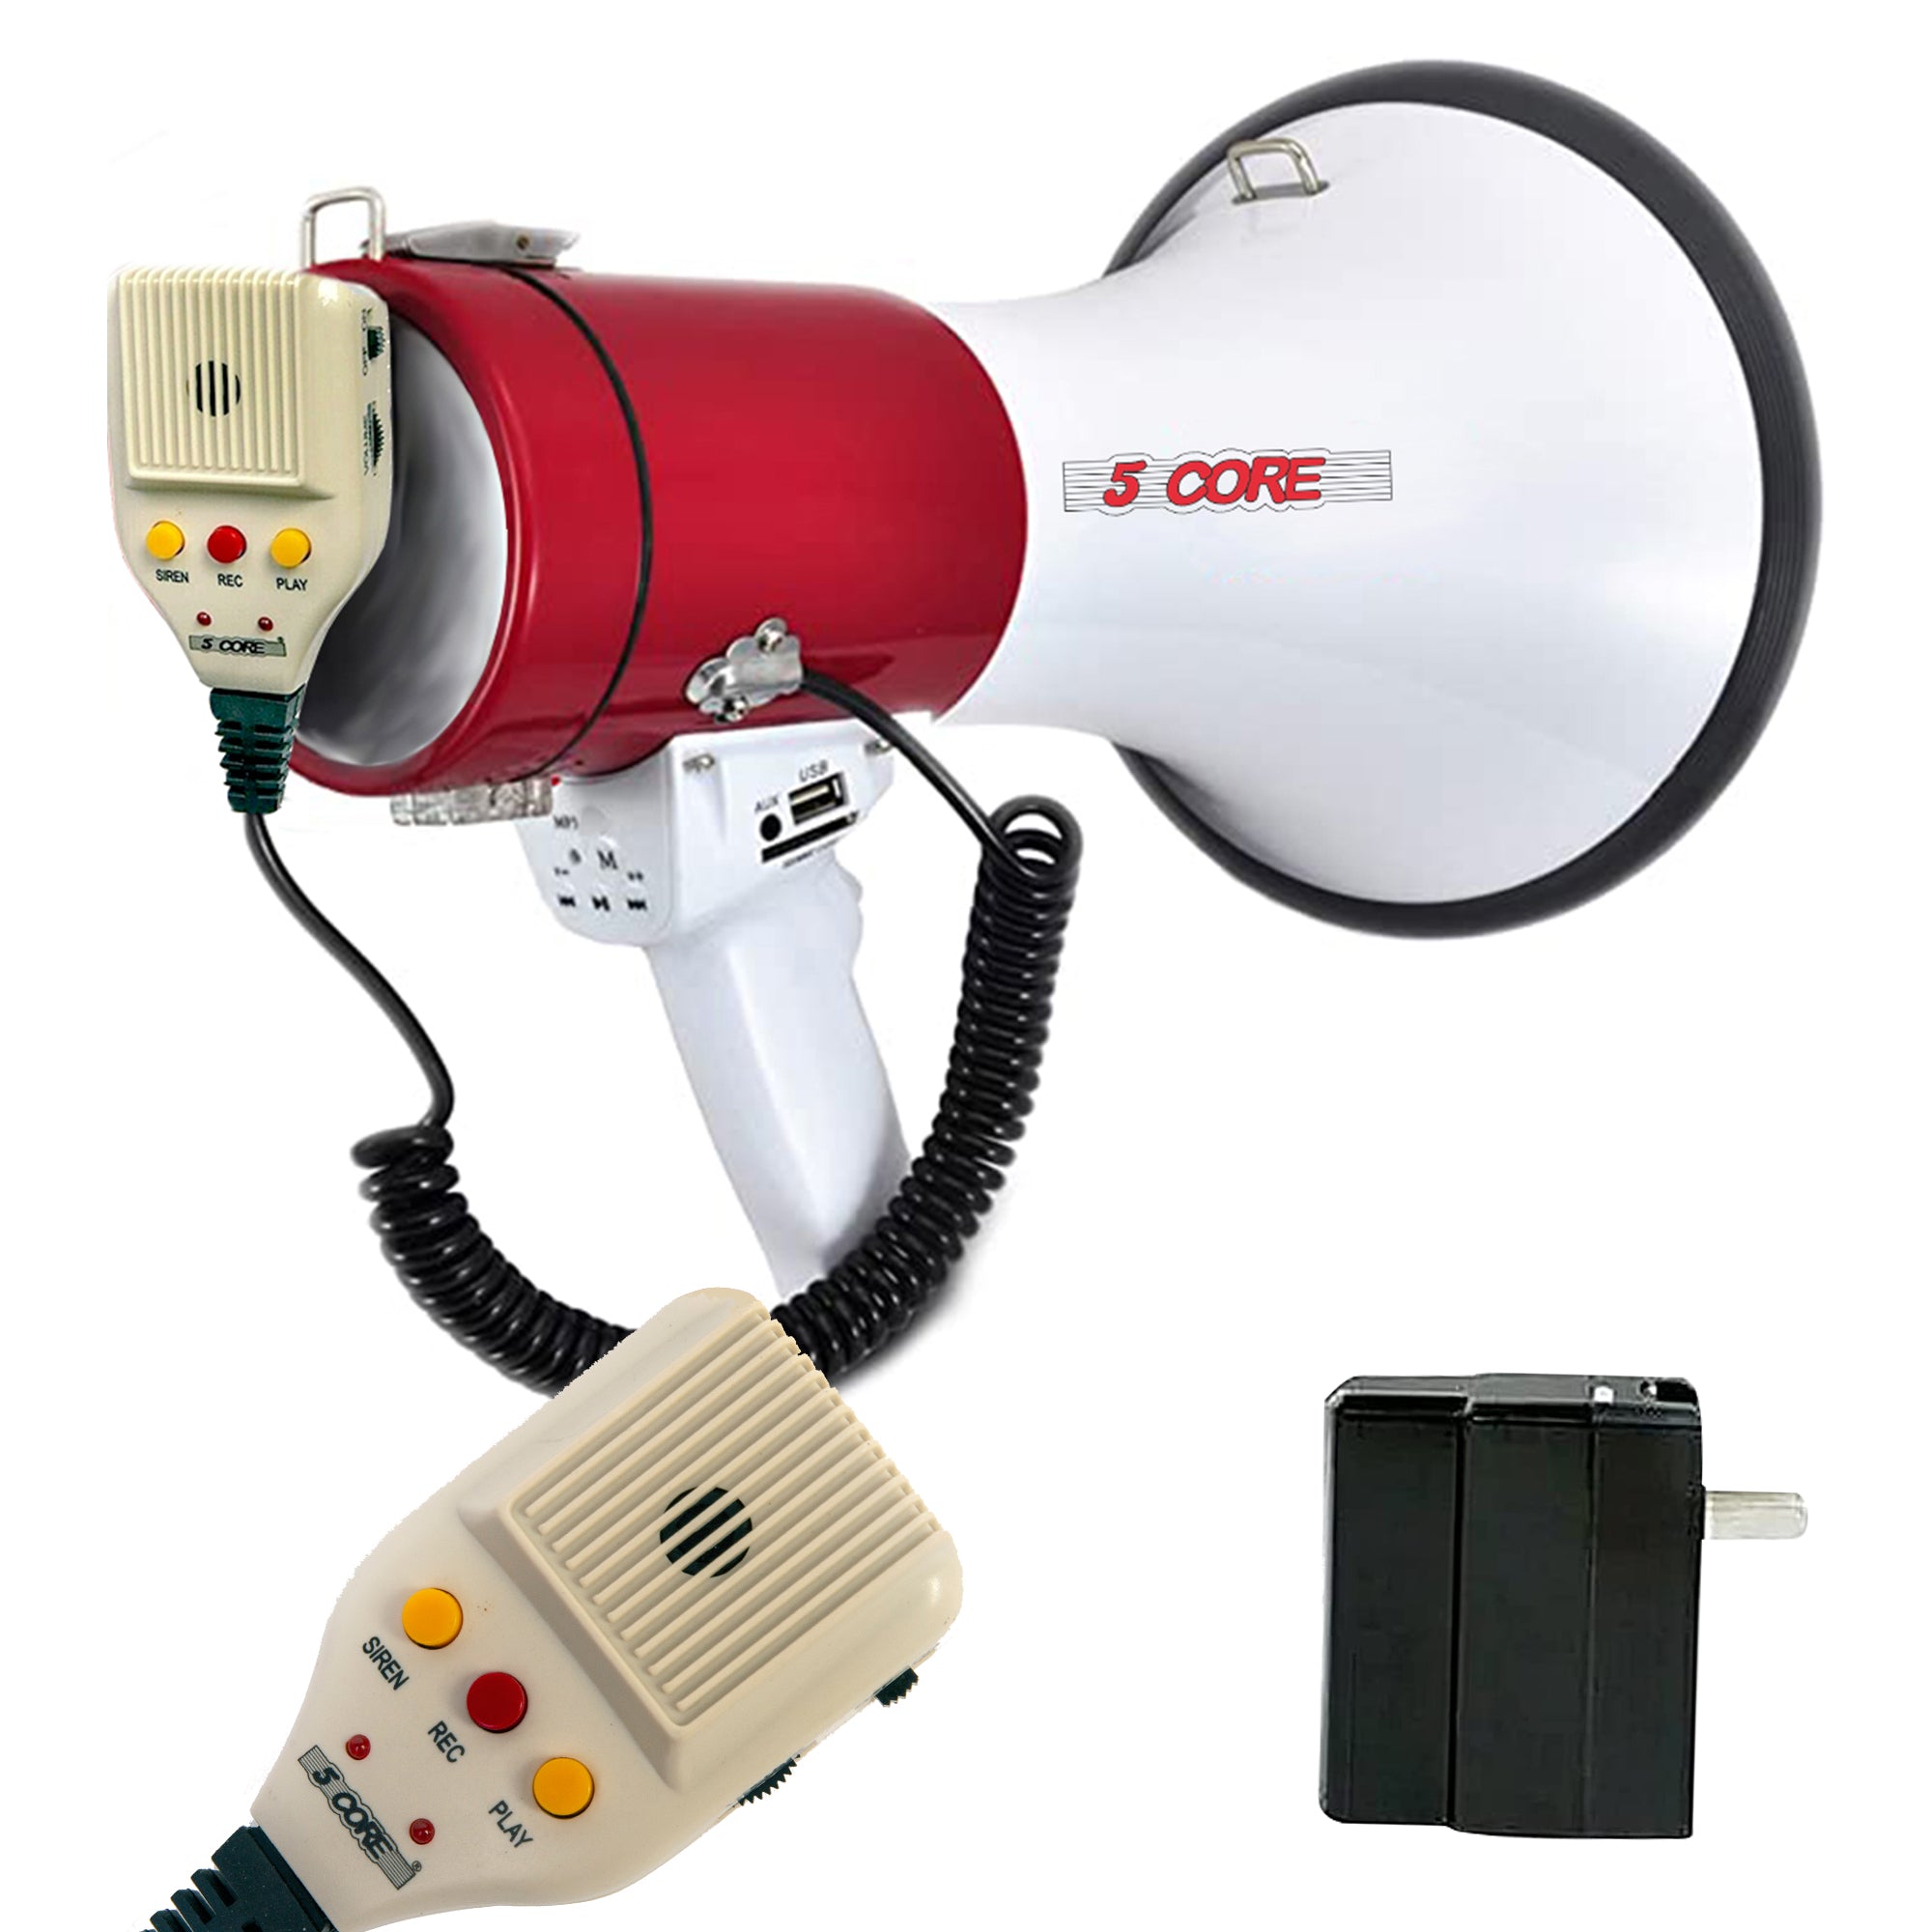 5 Core High Power Megaphone 50W Loud Siren Noise Maker Professional Bullhorn Speaker Rechargeable PA System w Recording USB SD Card -66SF WB